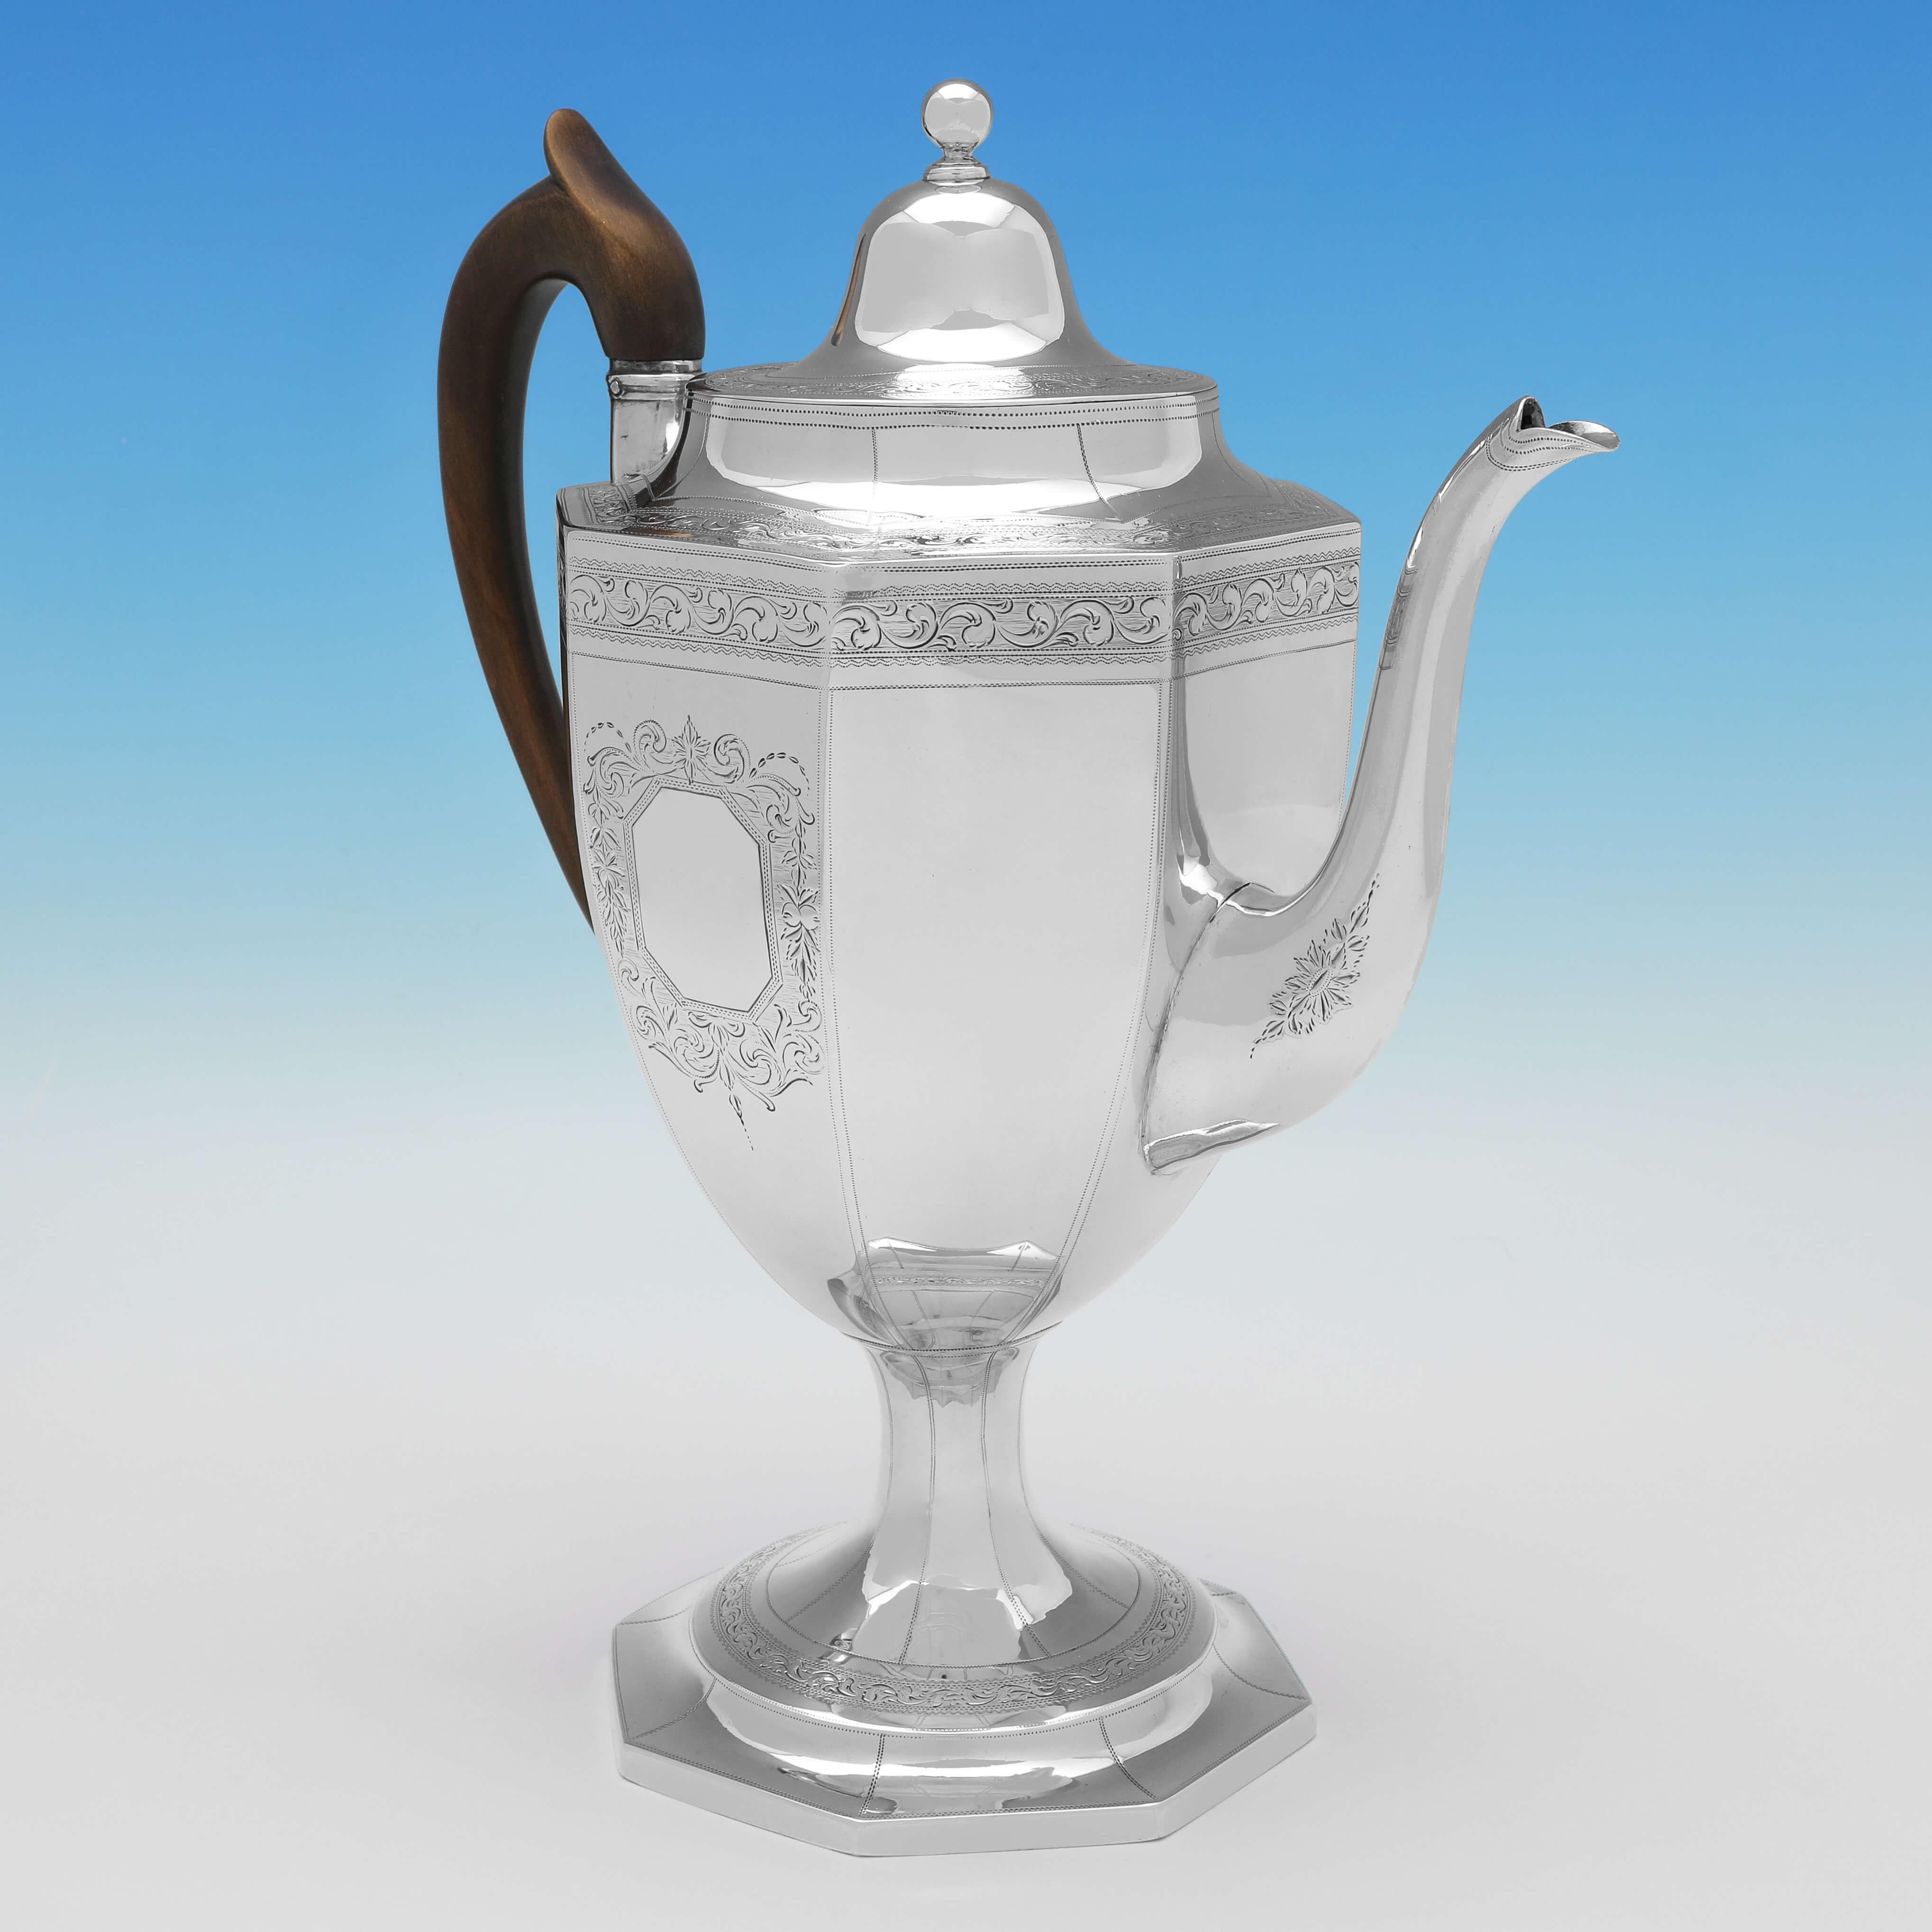 Hallmarked in London in 1801 by George Smith II & Thomas Hayter, this large and fine quality, George III, Antique Sterling Silver Coffee Pot, is octagonal in shape, standing on a pedestal foot, and features a wooden handle and bright cut engraved